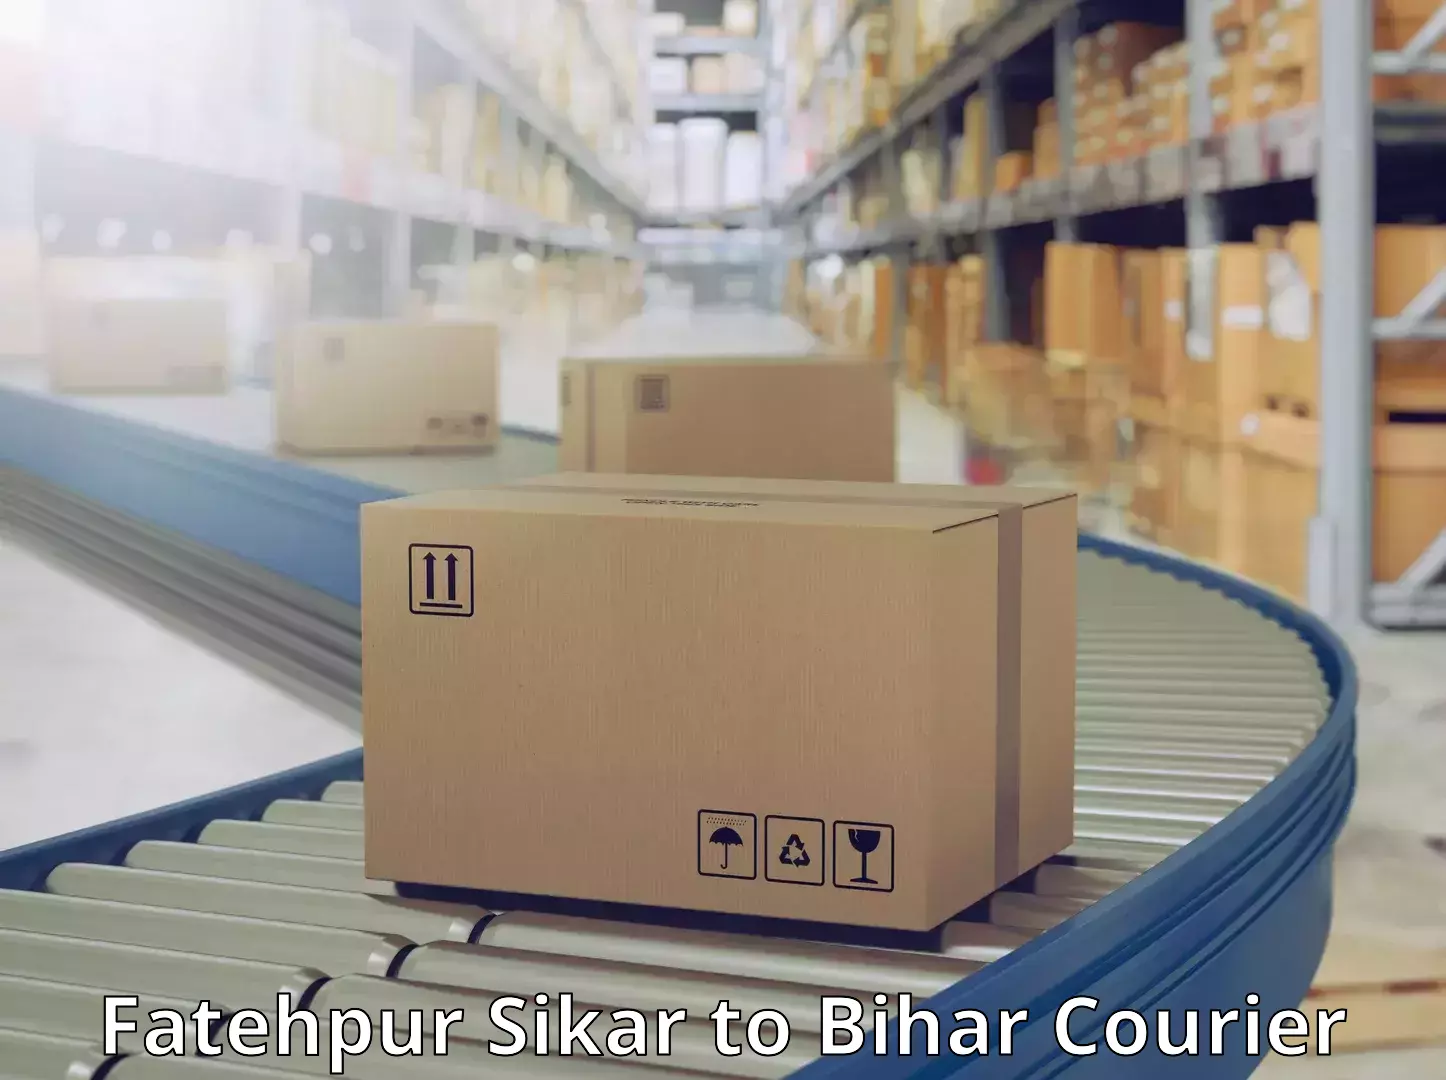 State-of-the-art courier technology Fatehpur Sikar to Kamtaul